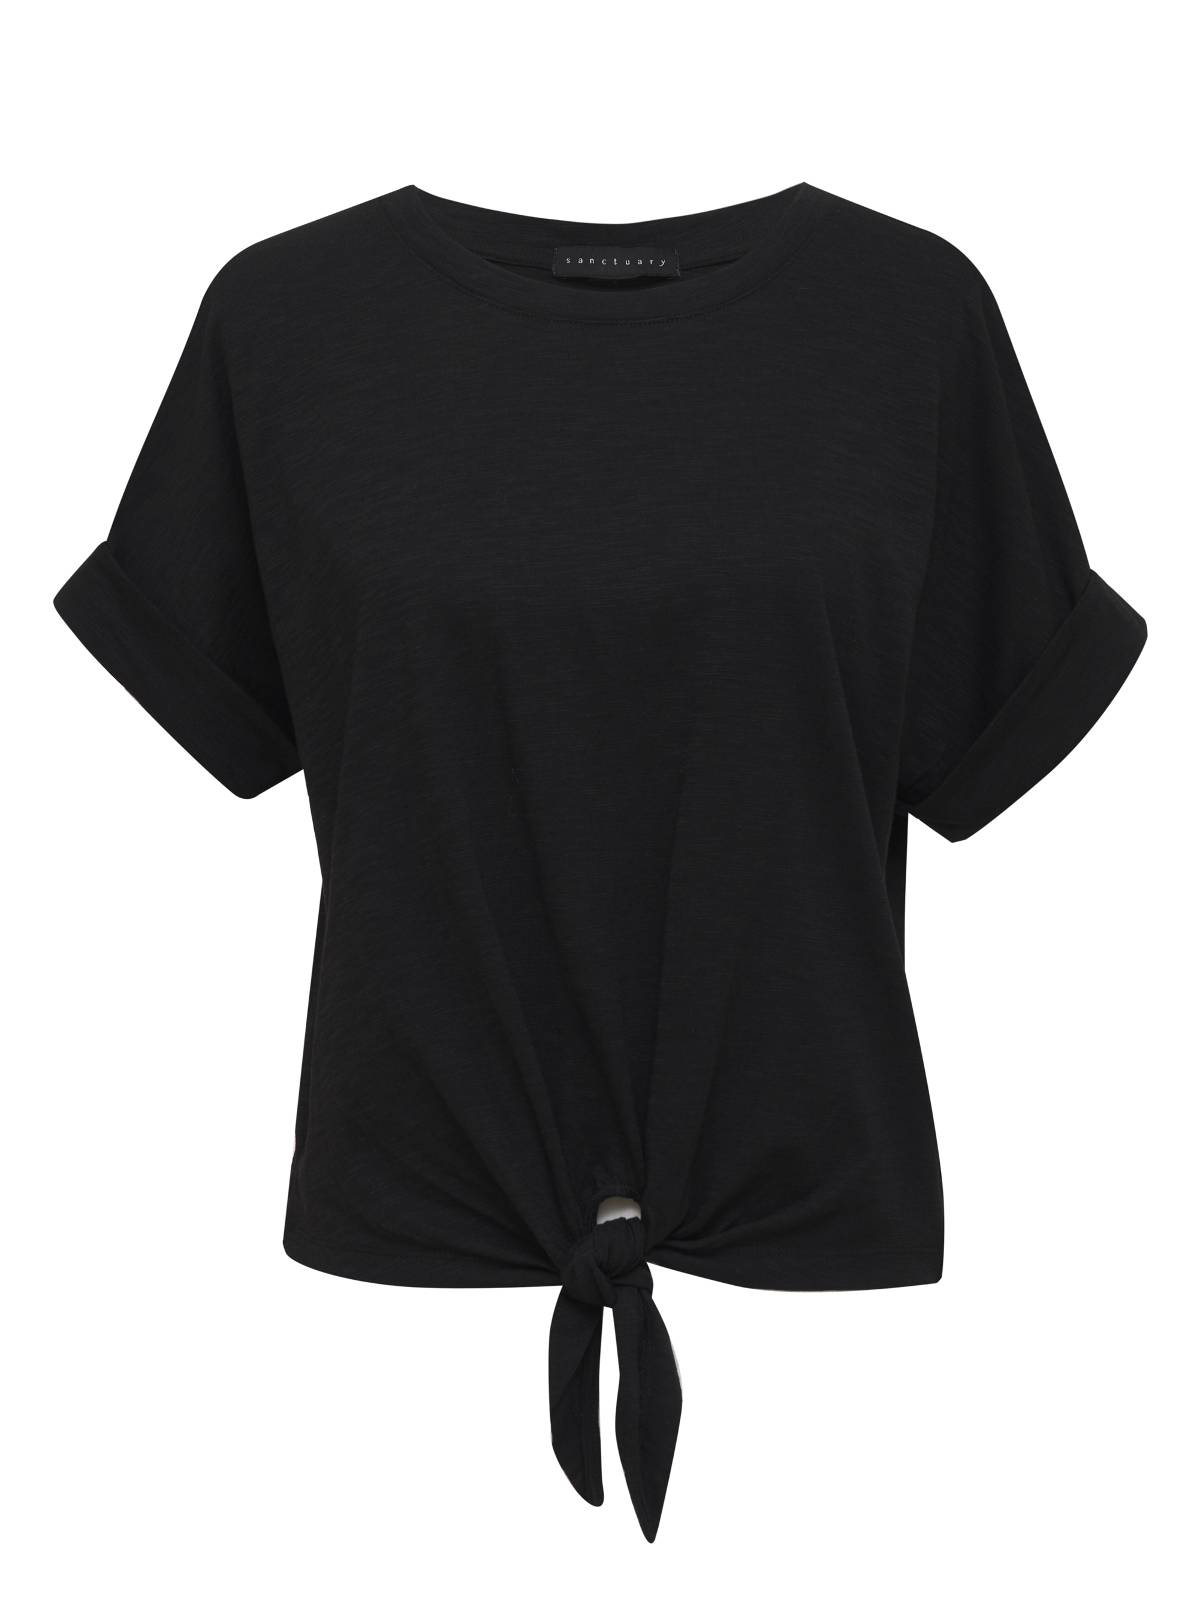 All Day Tie Tee Black